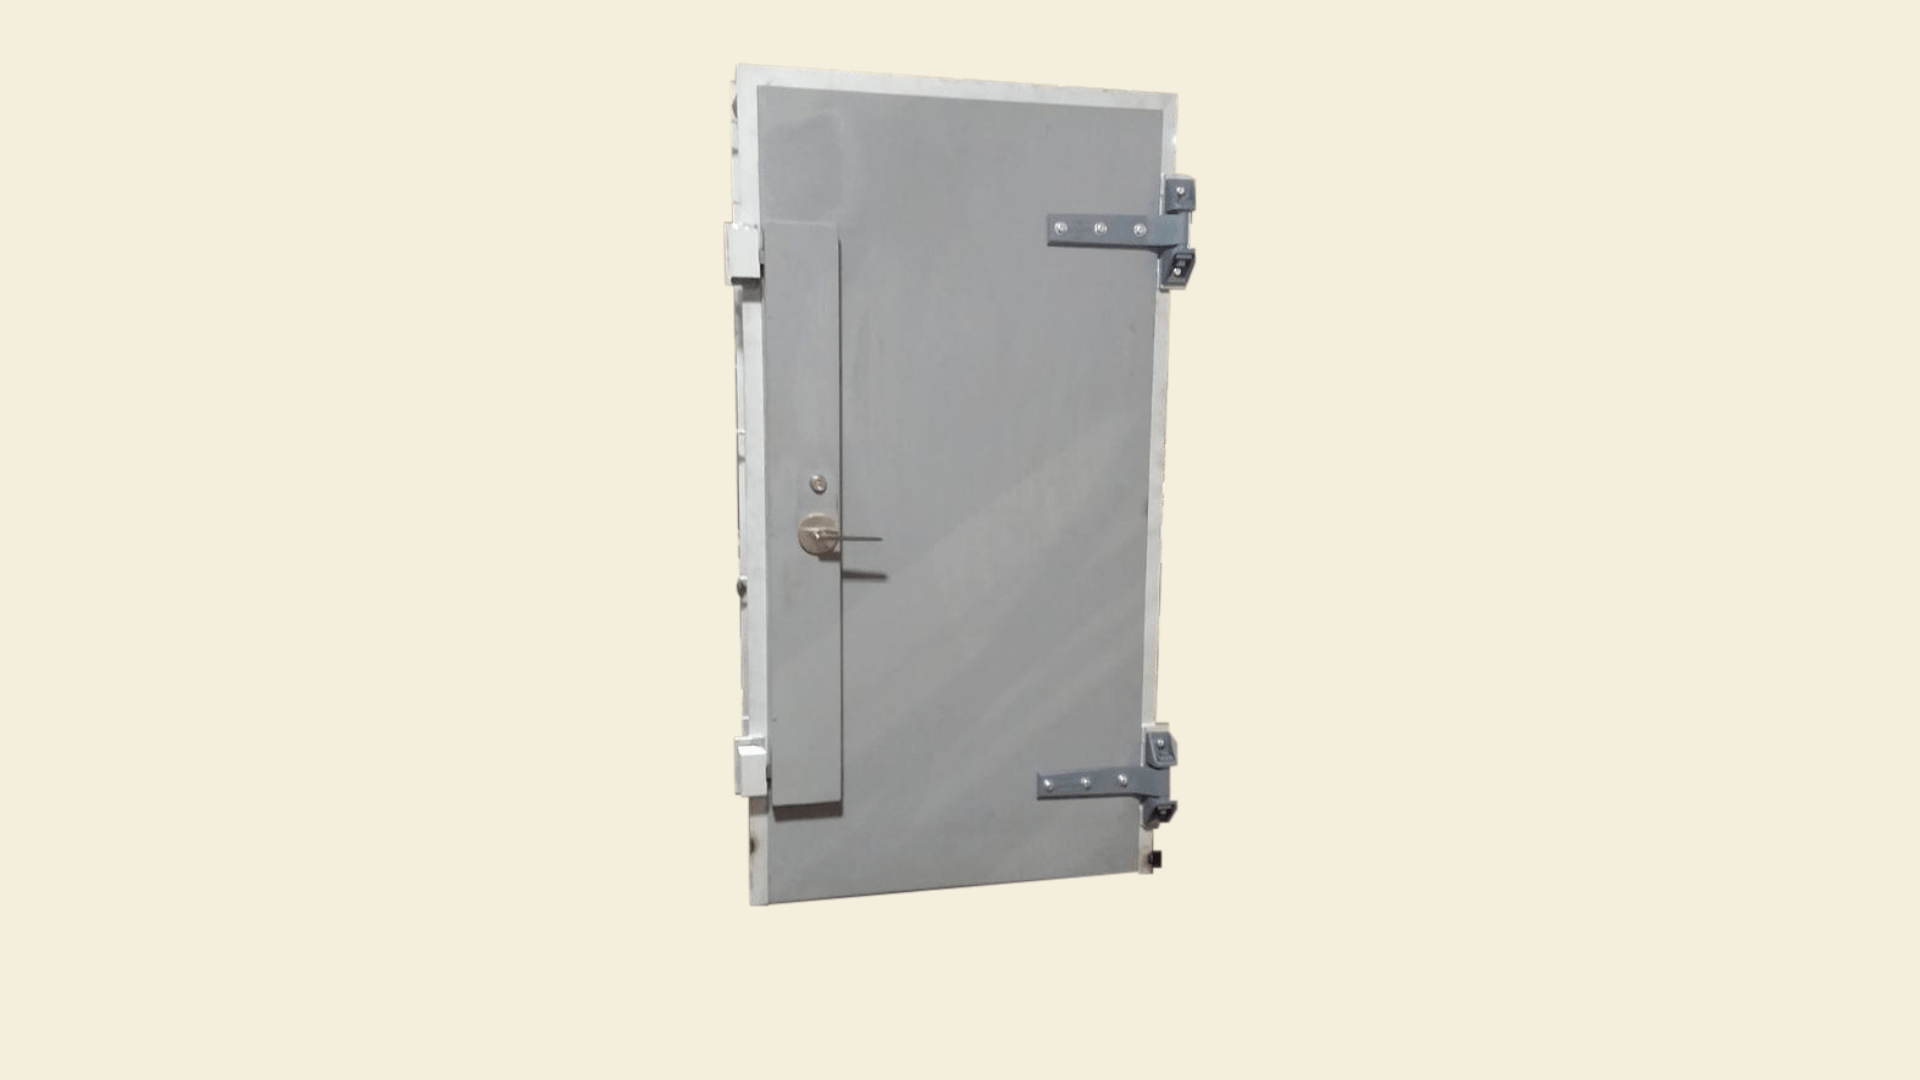 Model DS6-61L Engine Test Cell Door Rated for 59 STC